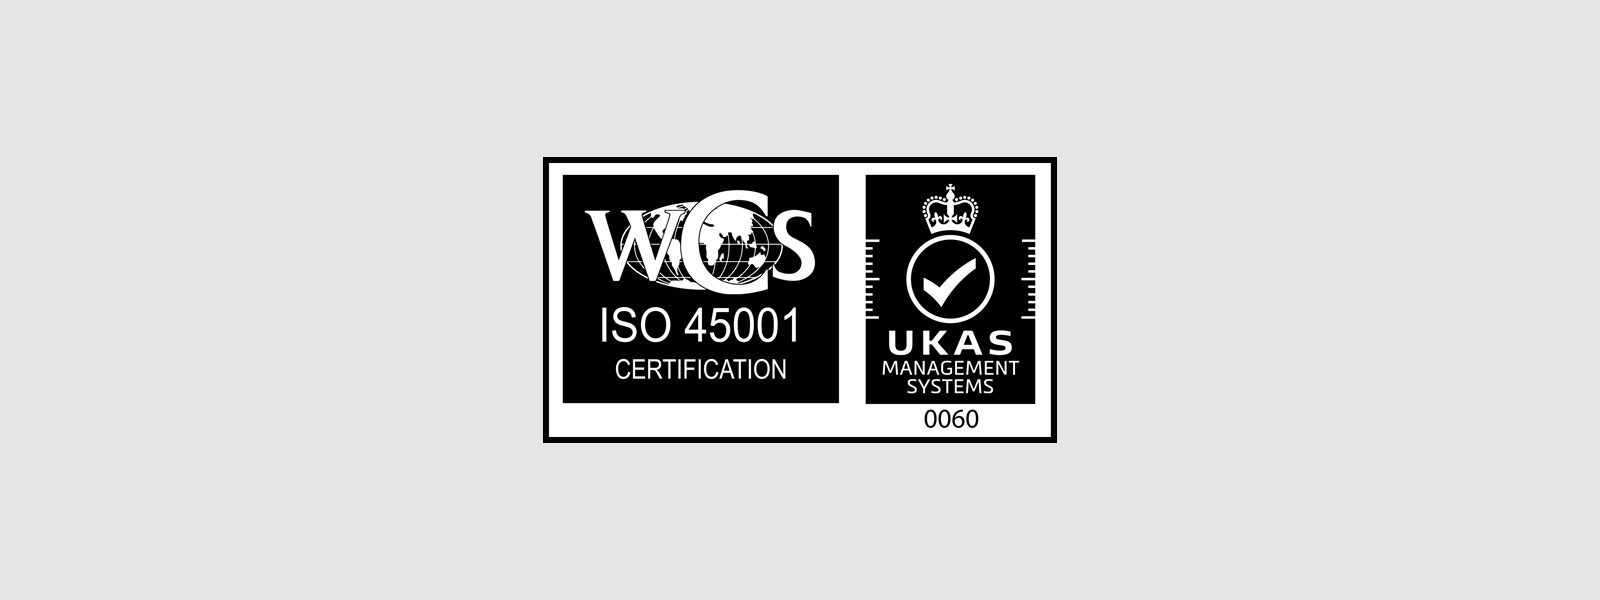 S Evans & Sons migrates to ISO 45001